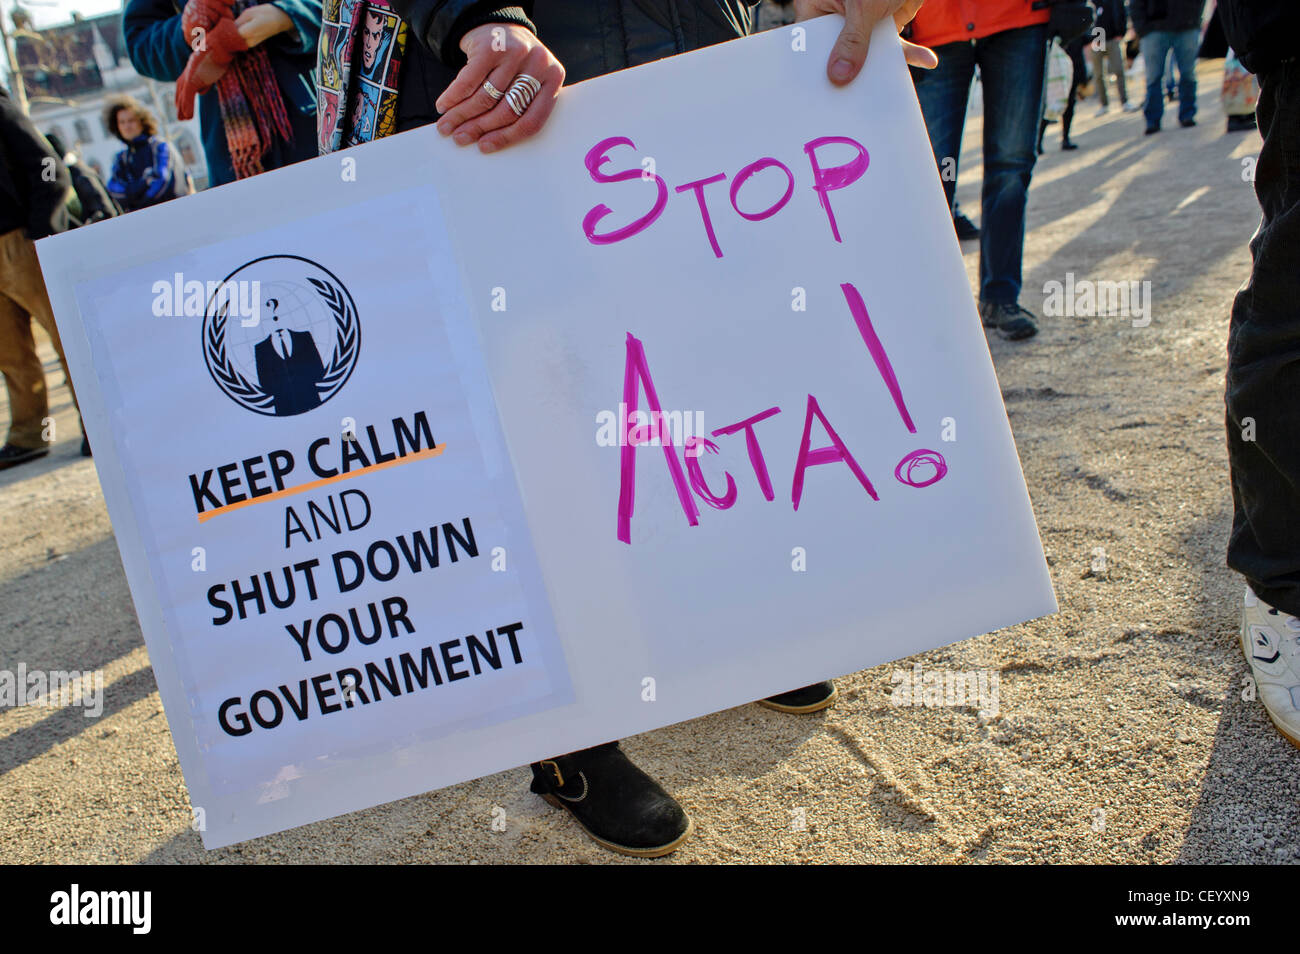 Protesters hold up a sign that reads 'Keep calm and shut down your government' and 'Stop ACTA!' Stock Photo